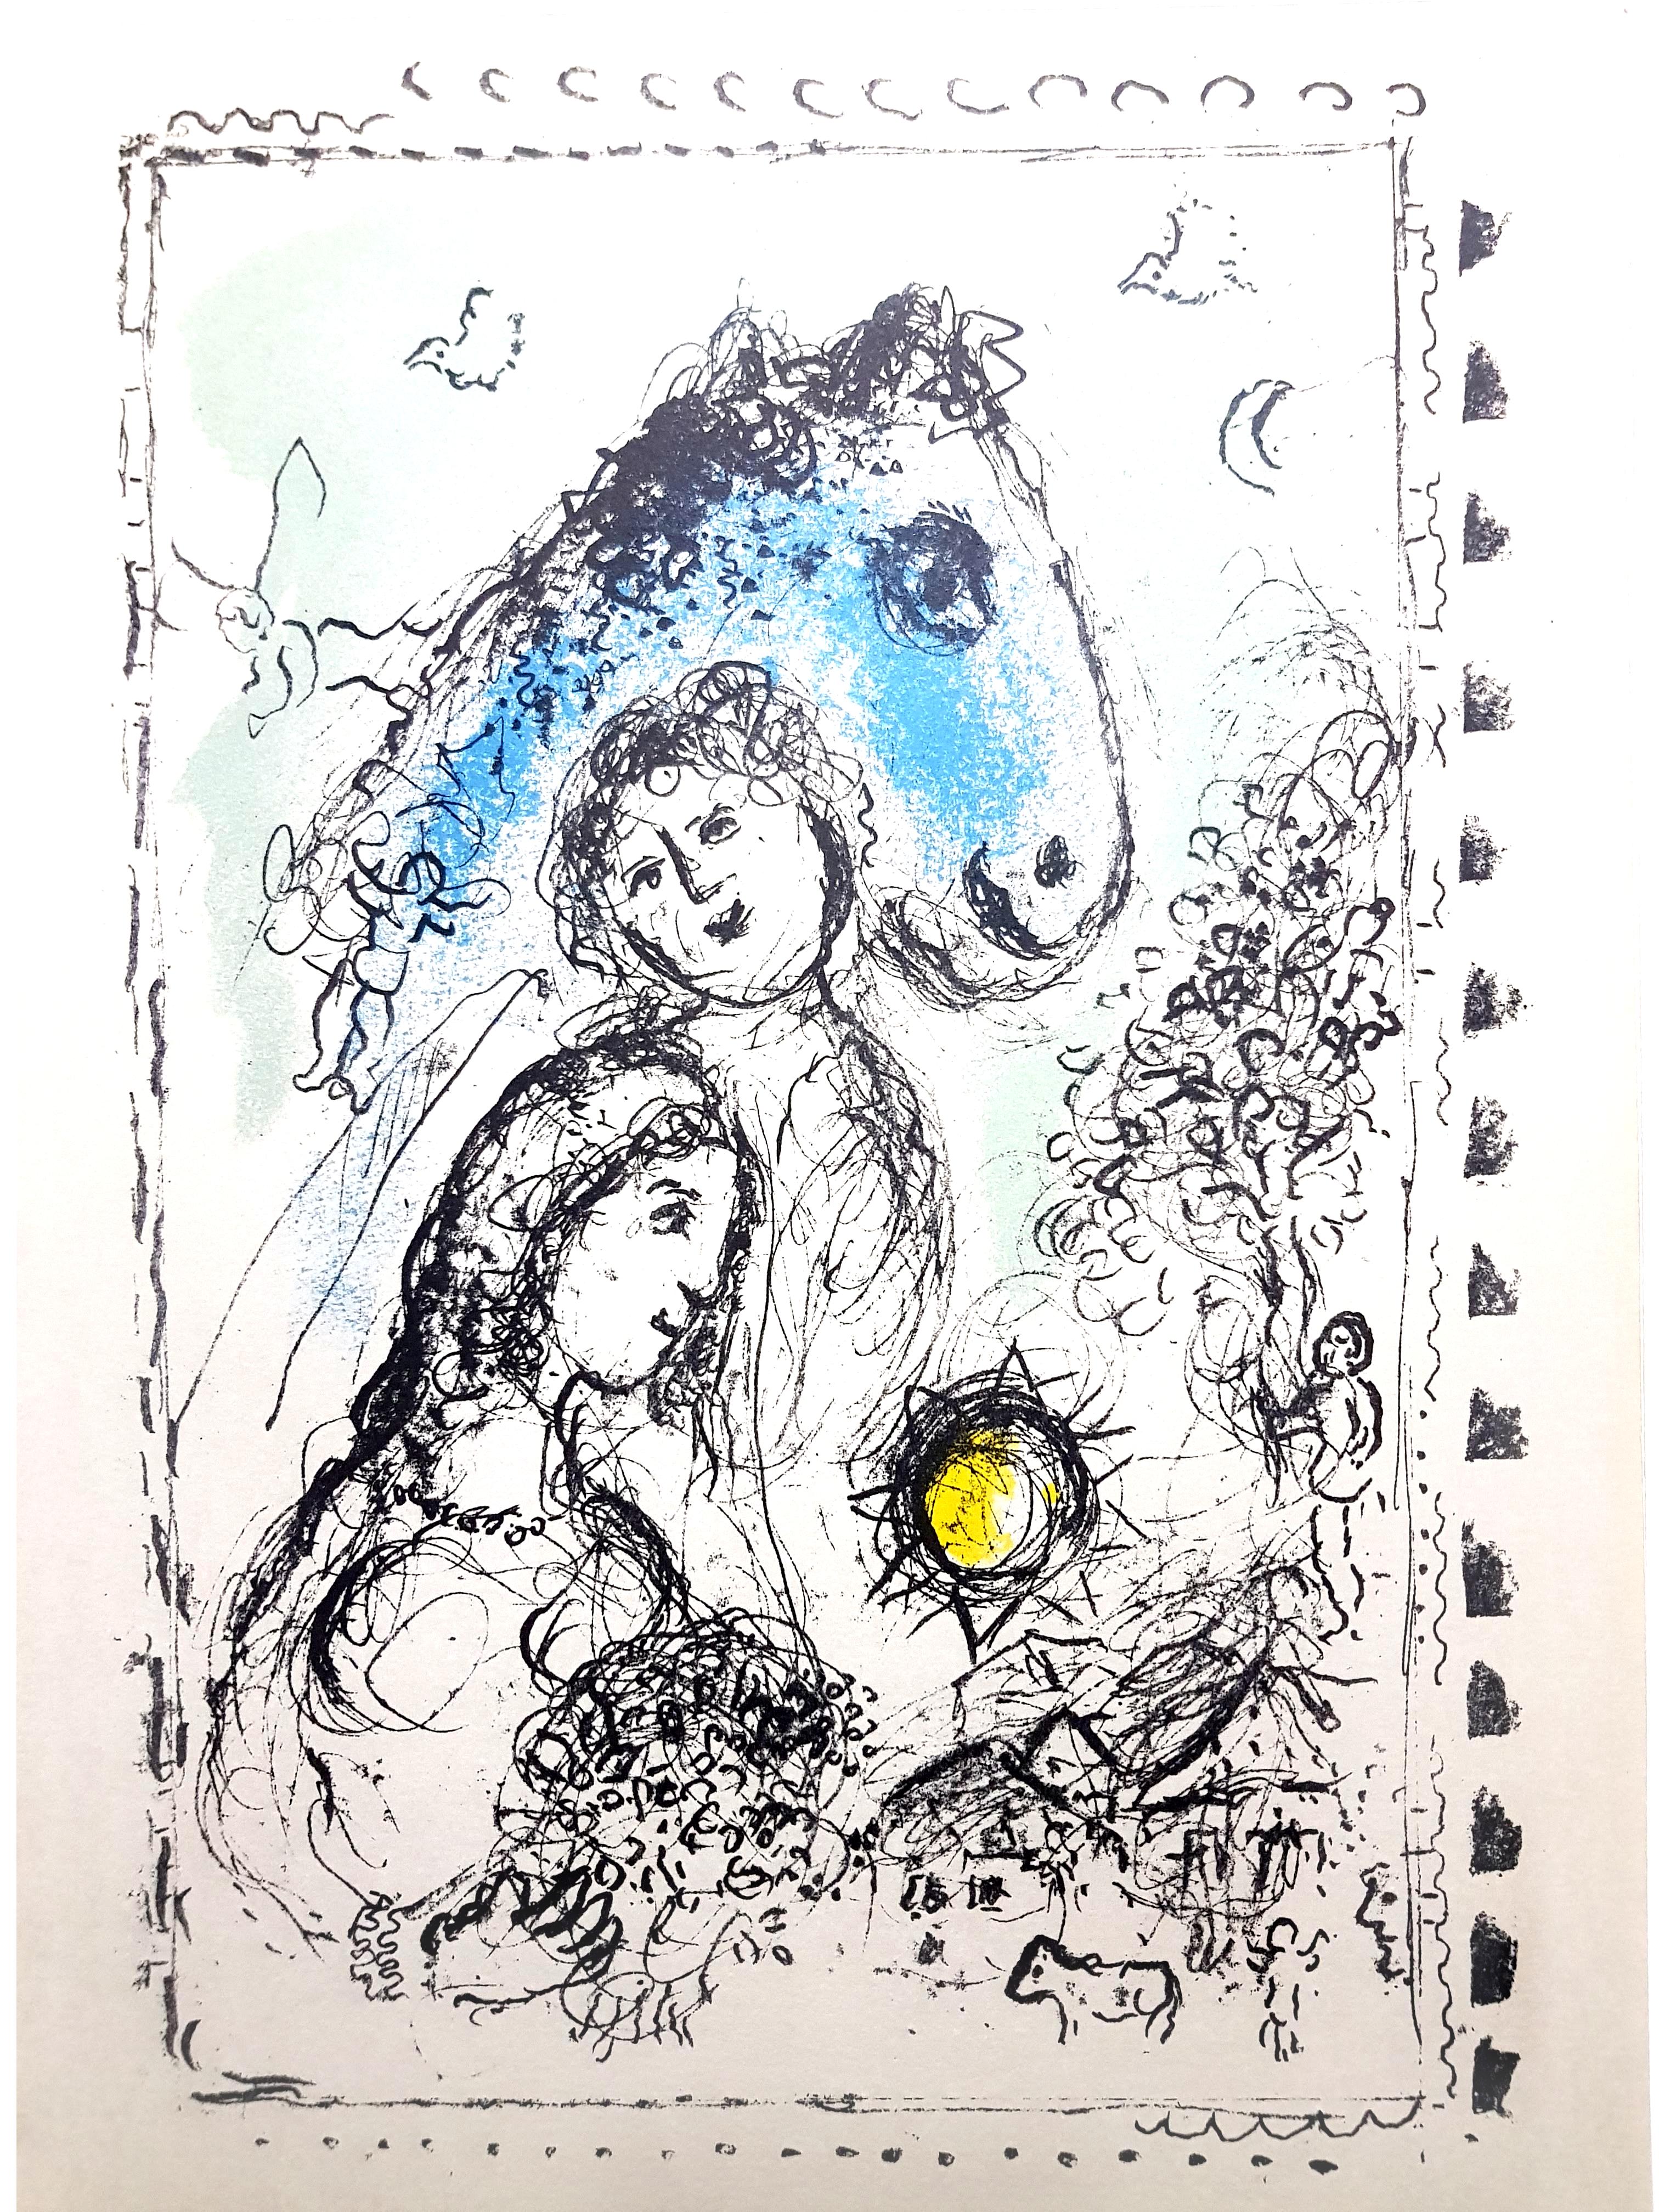 Marc Chagall - Couple - Original Lithograph
Published in the deluxe art review, XXe Siècle 
1976
Unsigned, as issued
Dimensions: 32 x 25 cm
Publisher: Cahiers d'art published under the direction of G. di San Lazzaro.

Marc Chagall (born in